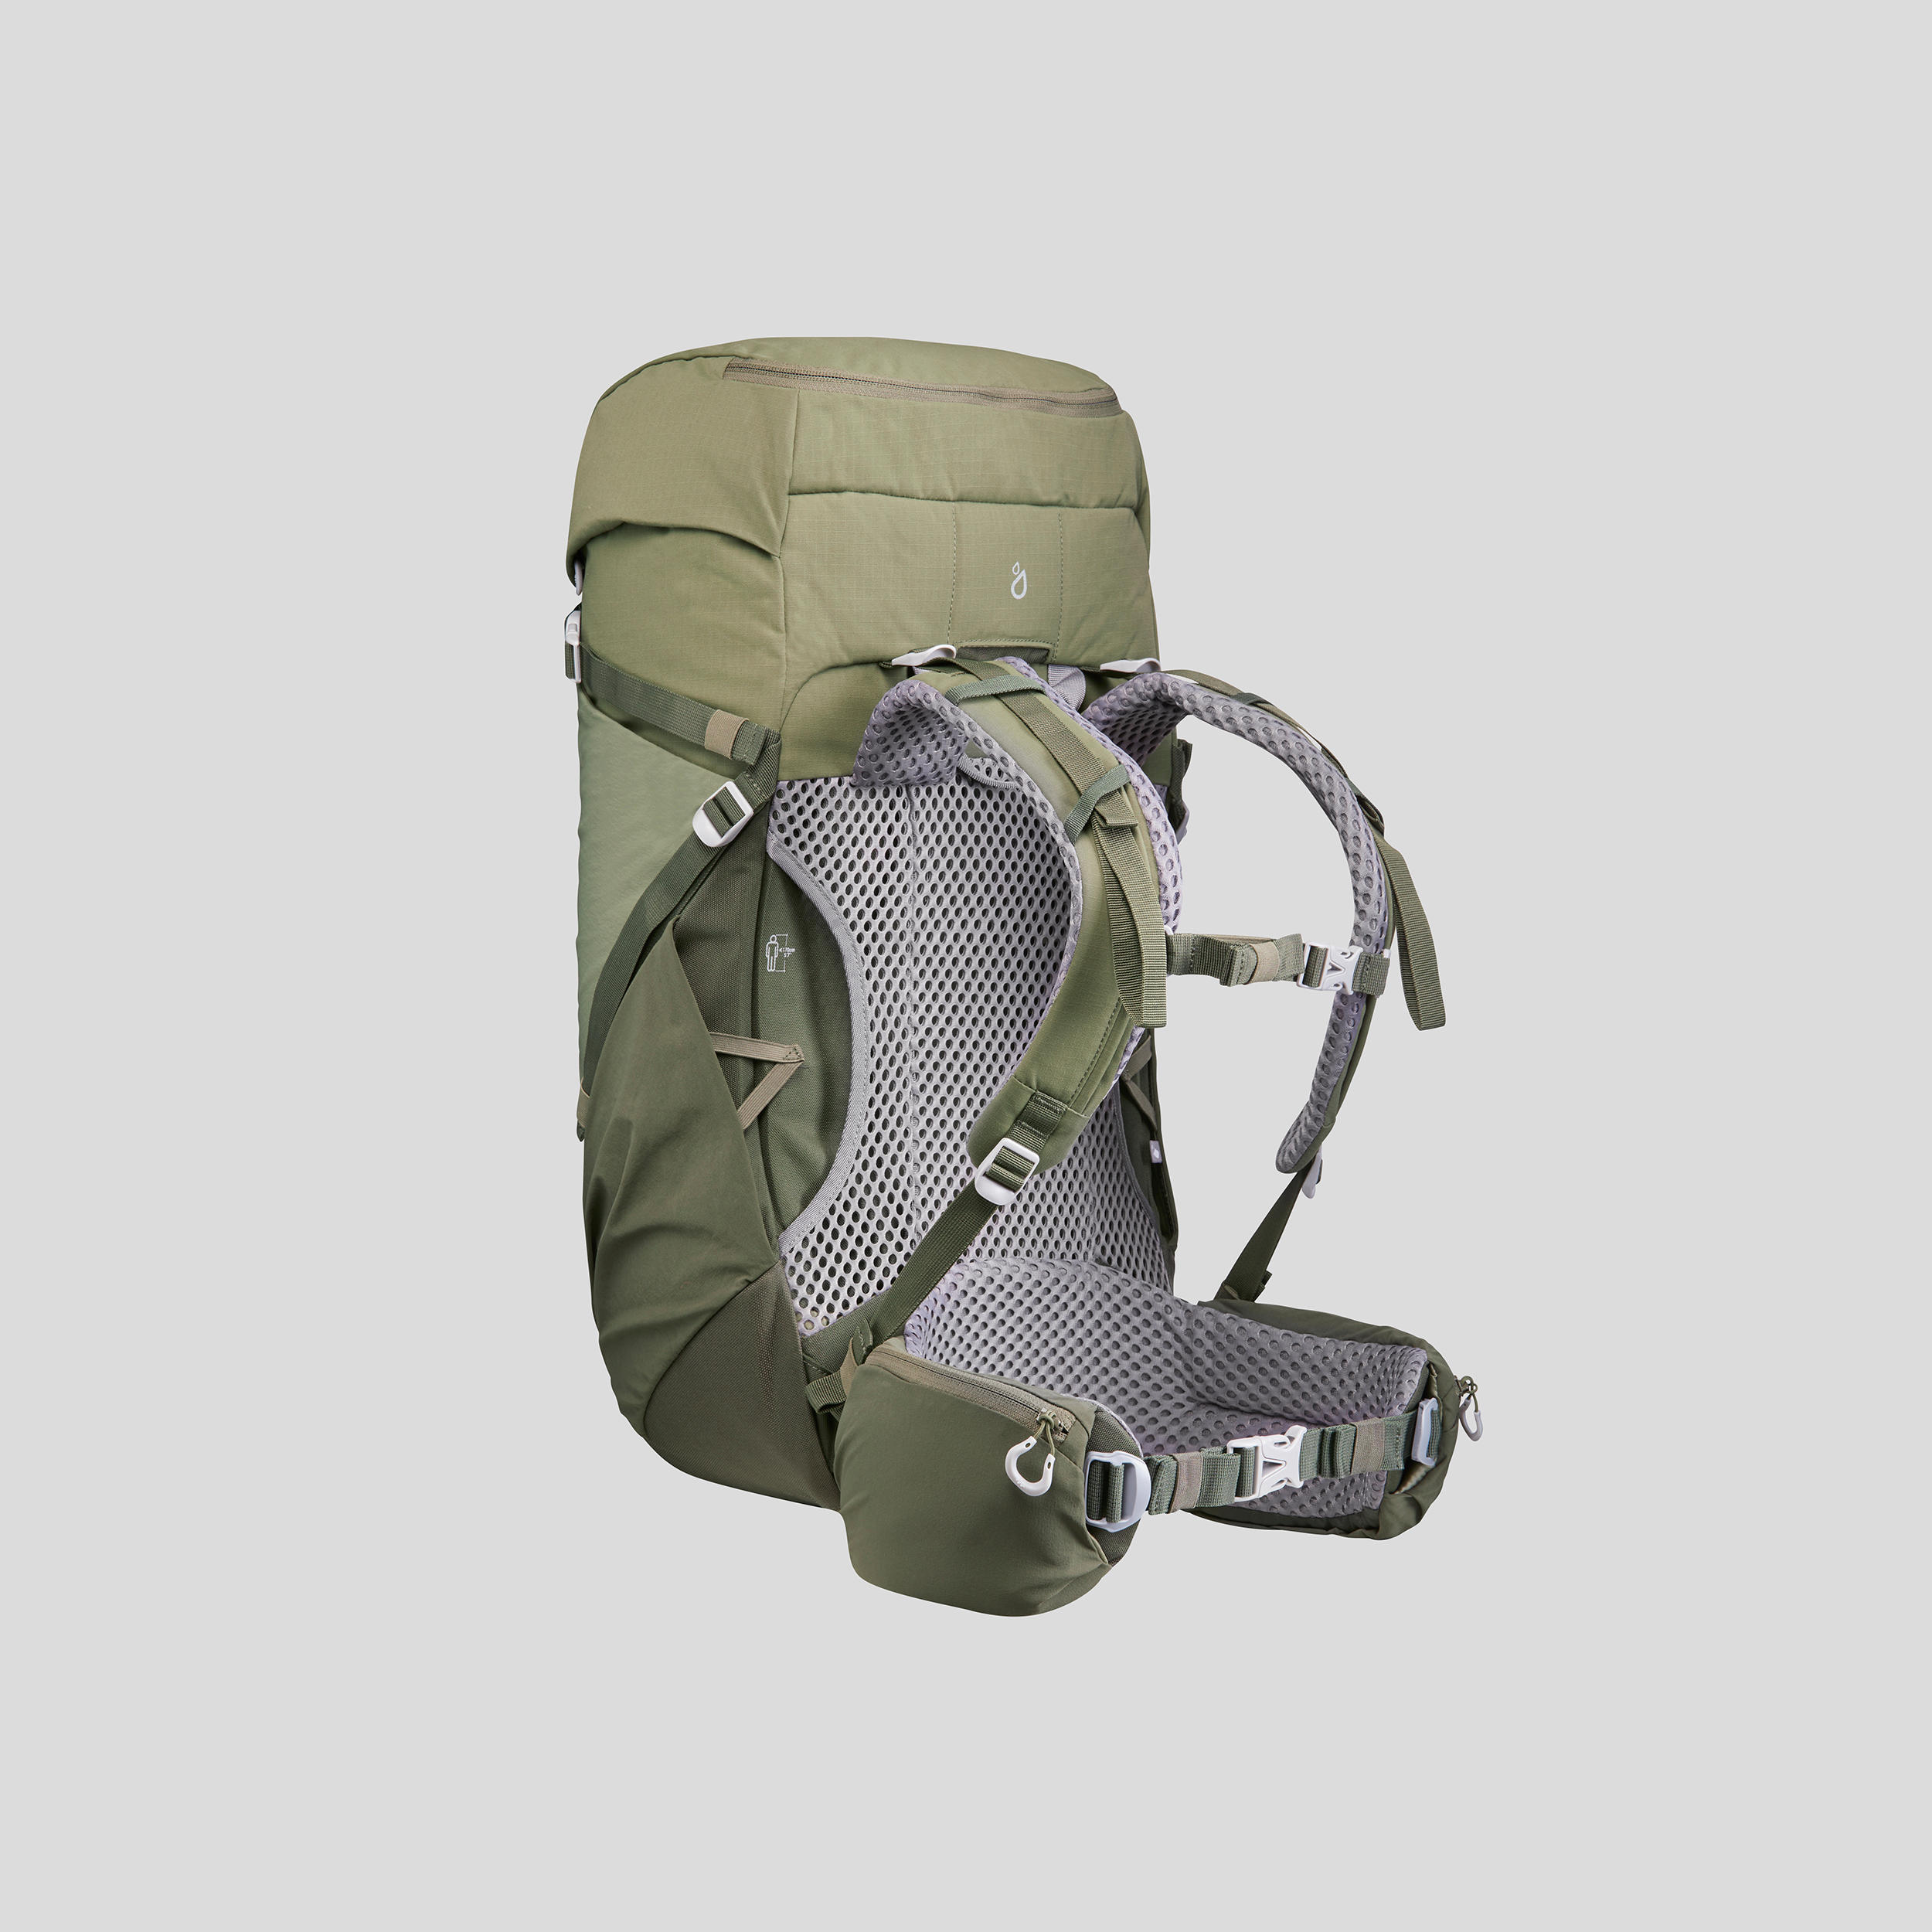 Mountain hiking backpack 40L - MH500 4/13